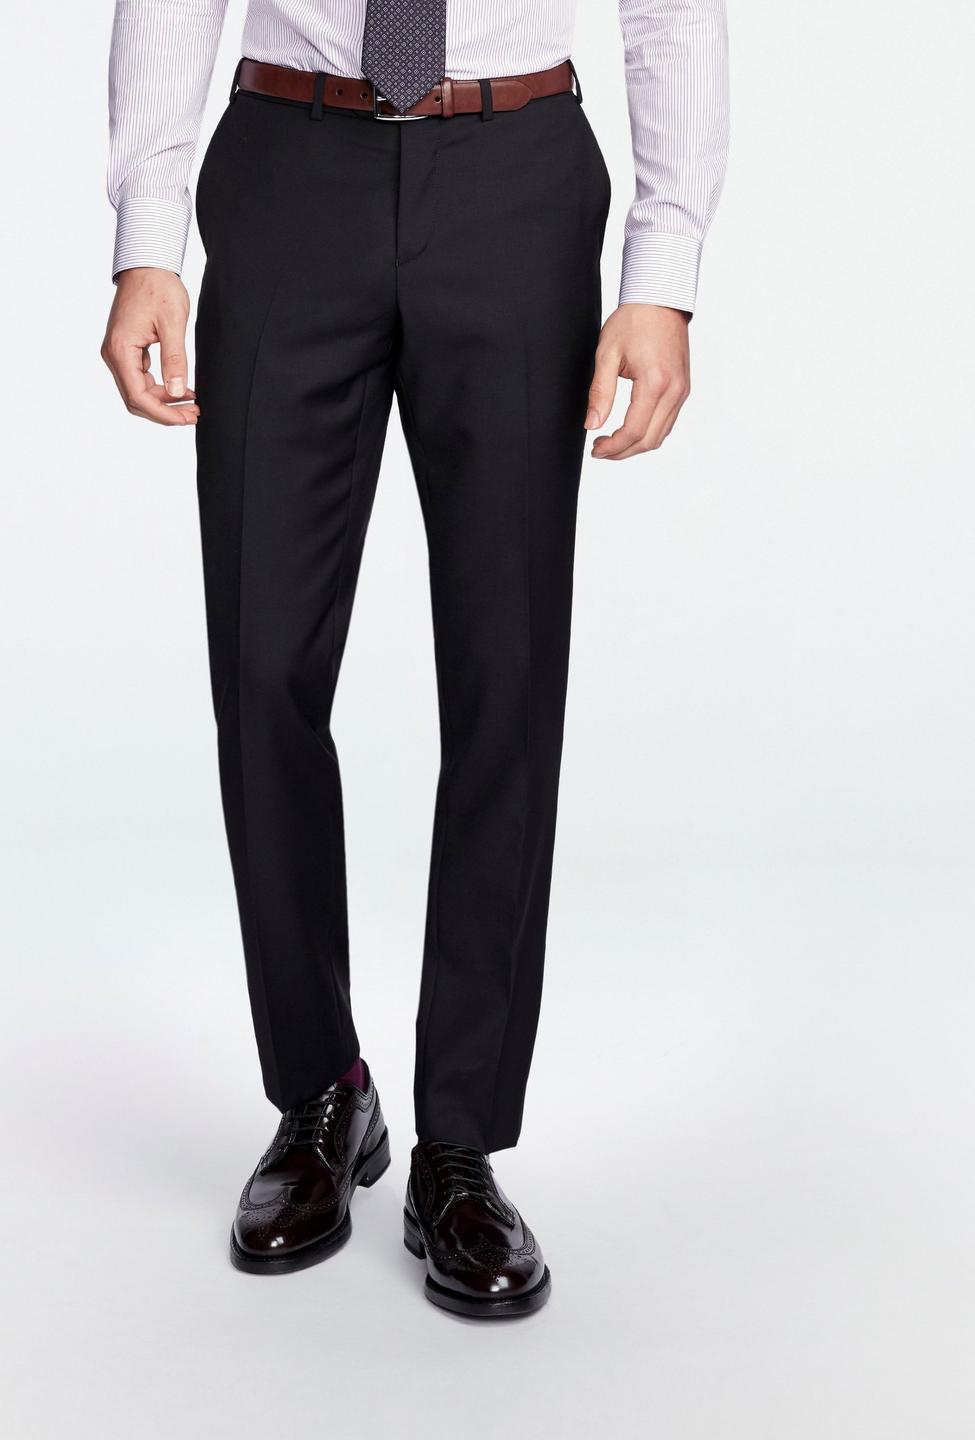 Black pants - Hemsworth Solid Design from Premium Indochino Collection